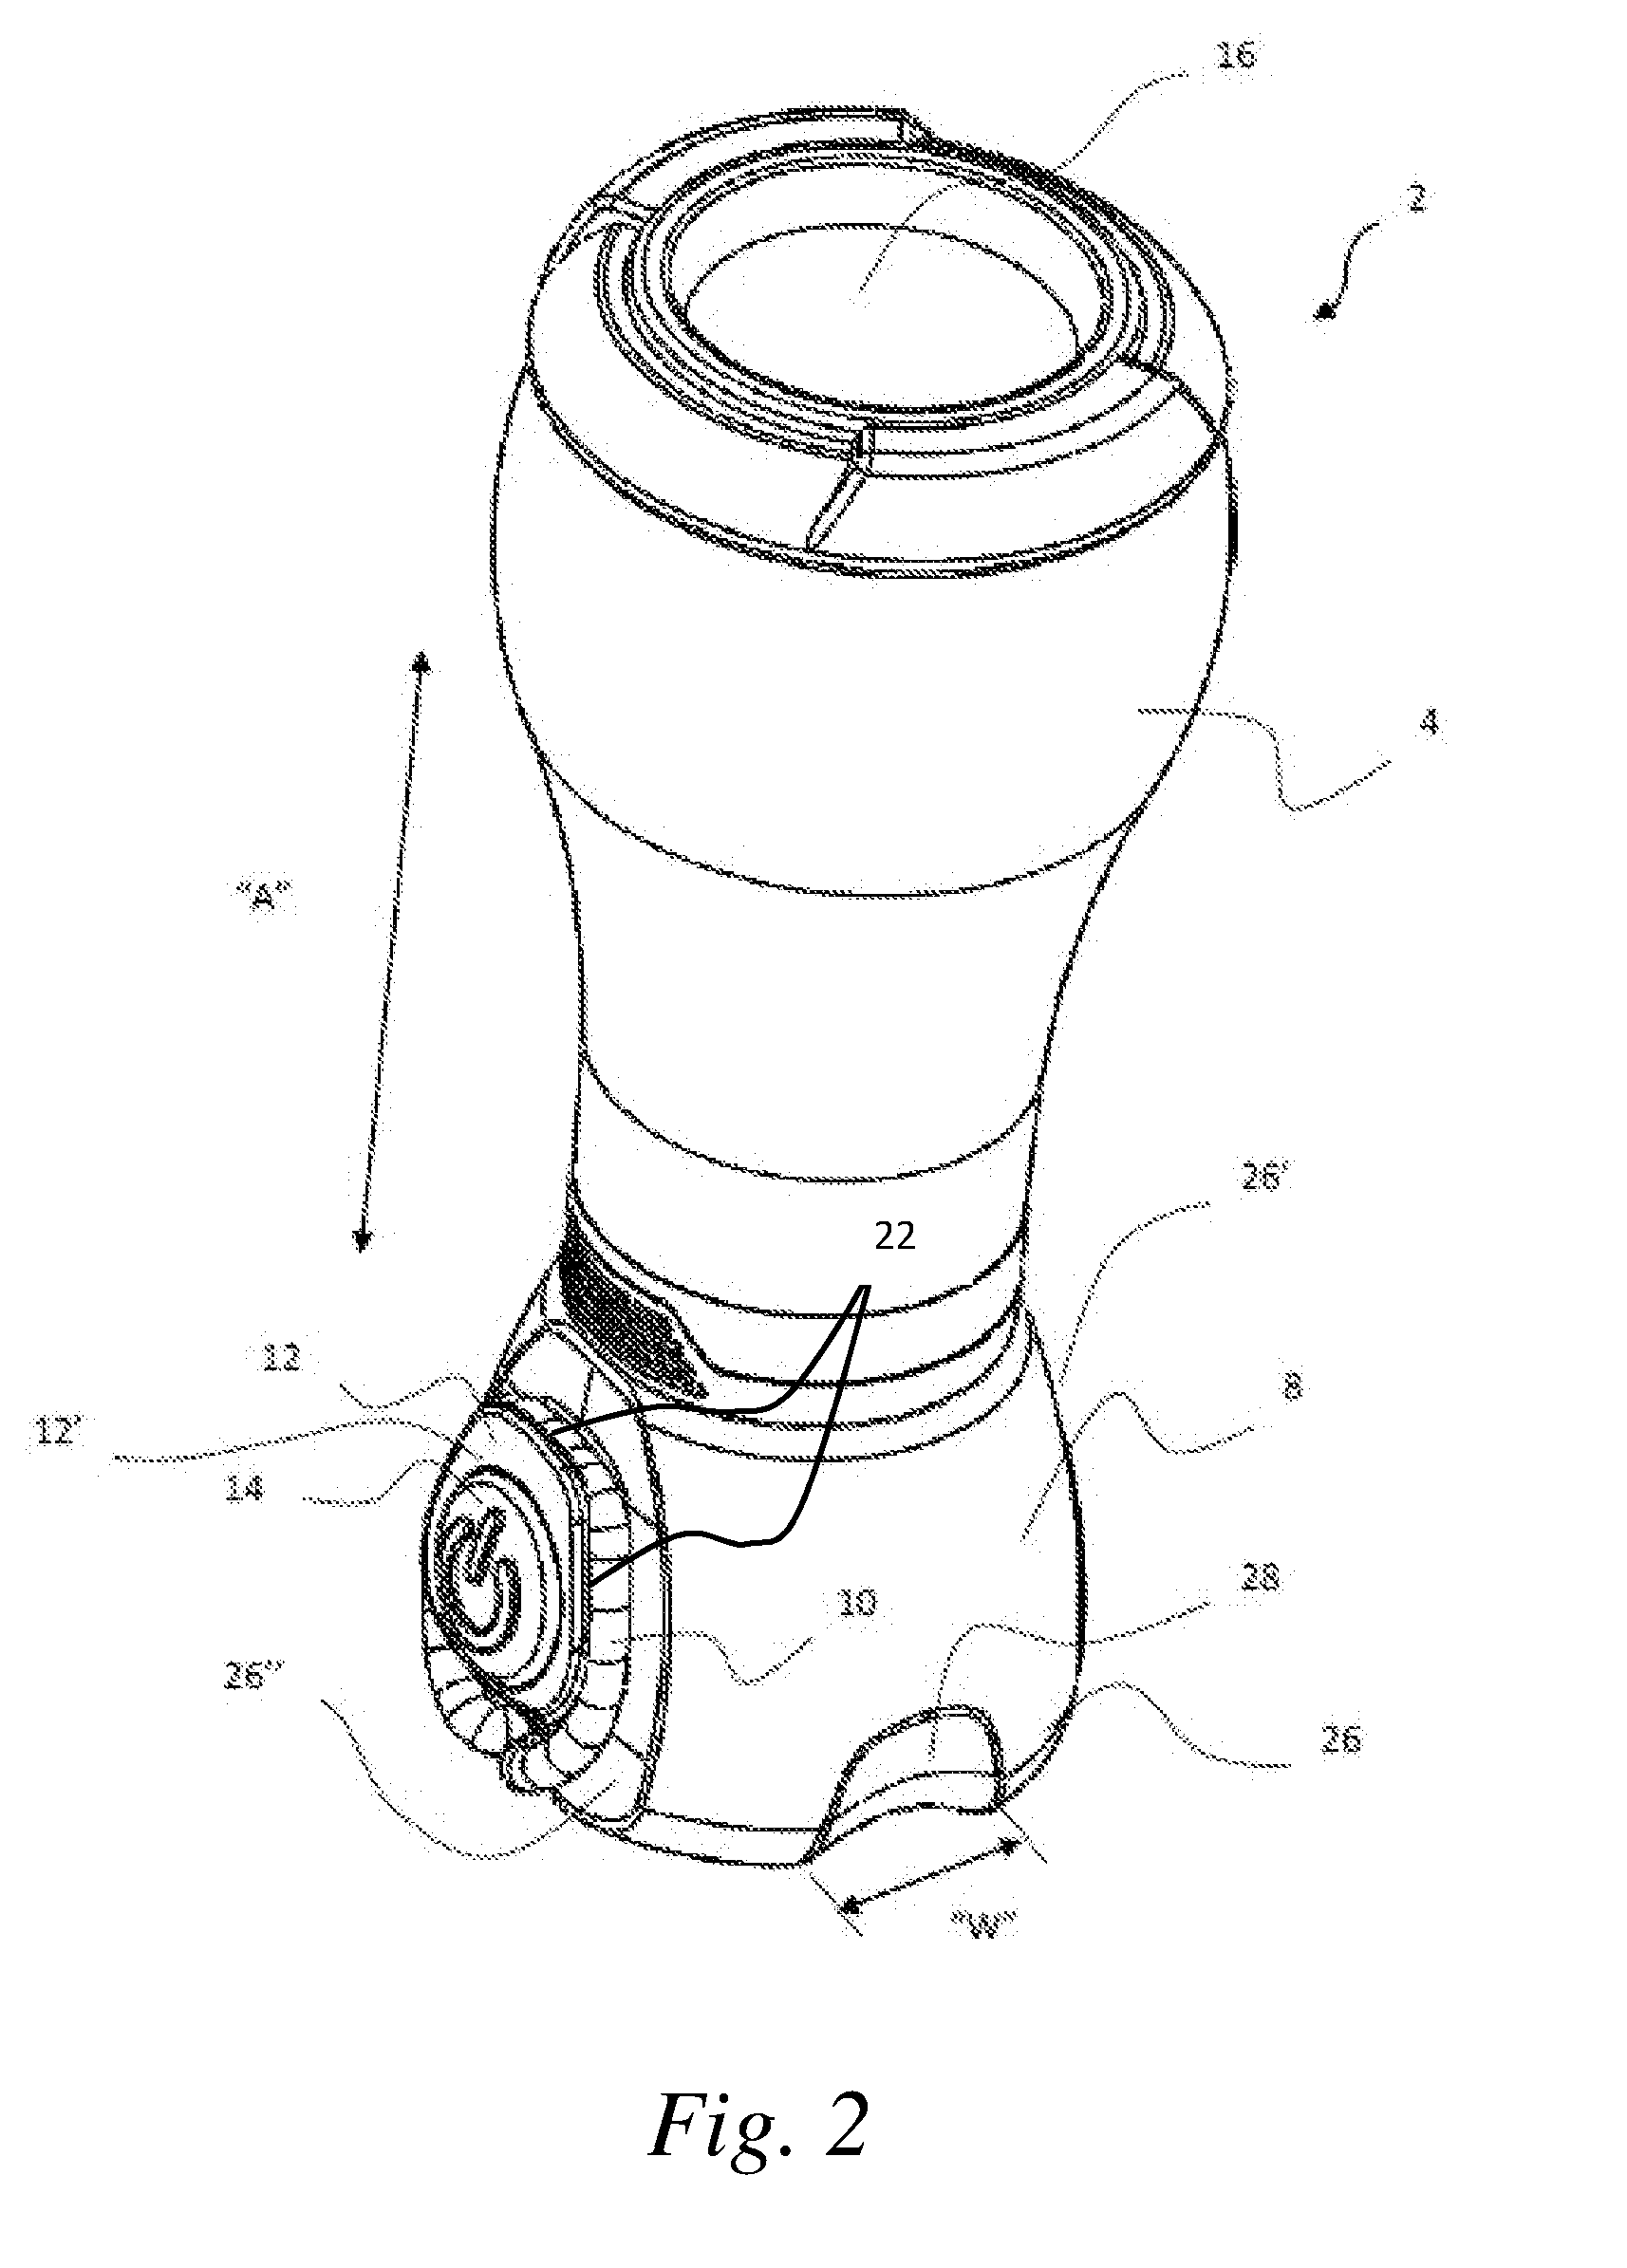 Portable lighting devices with multiuse lanyards and detachable lanyards